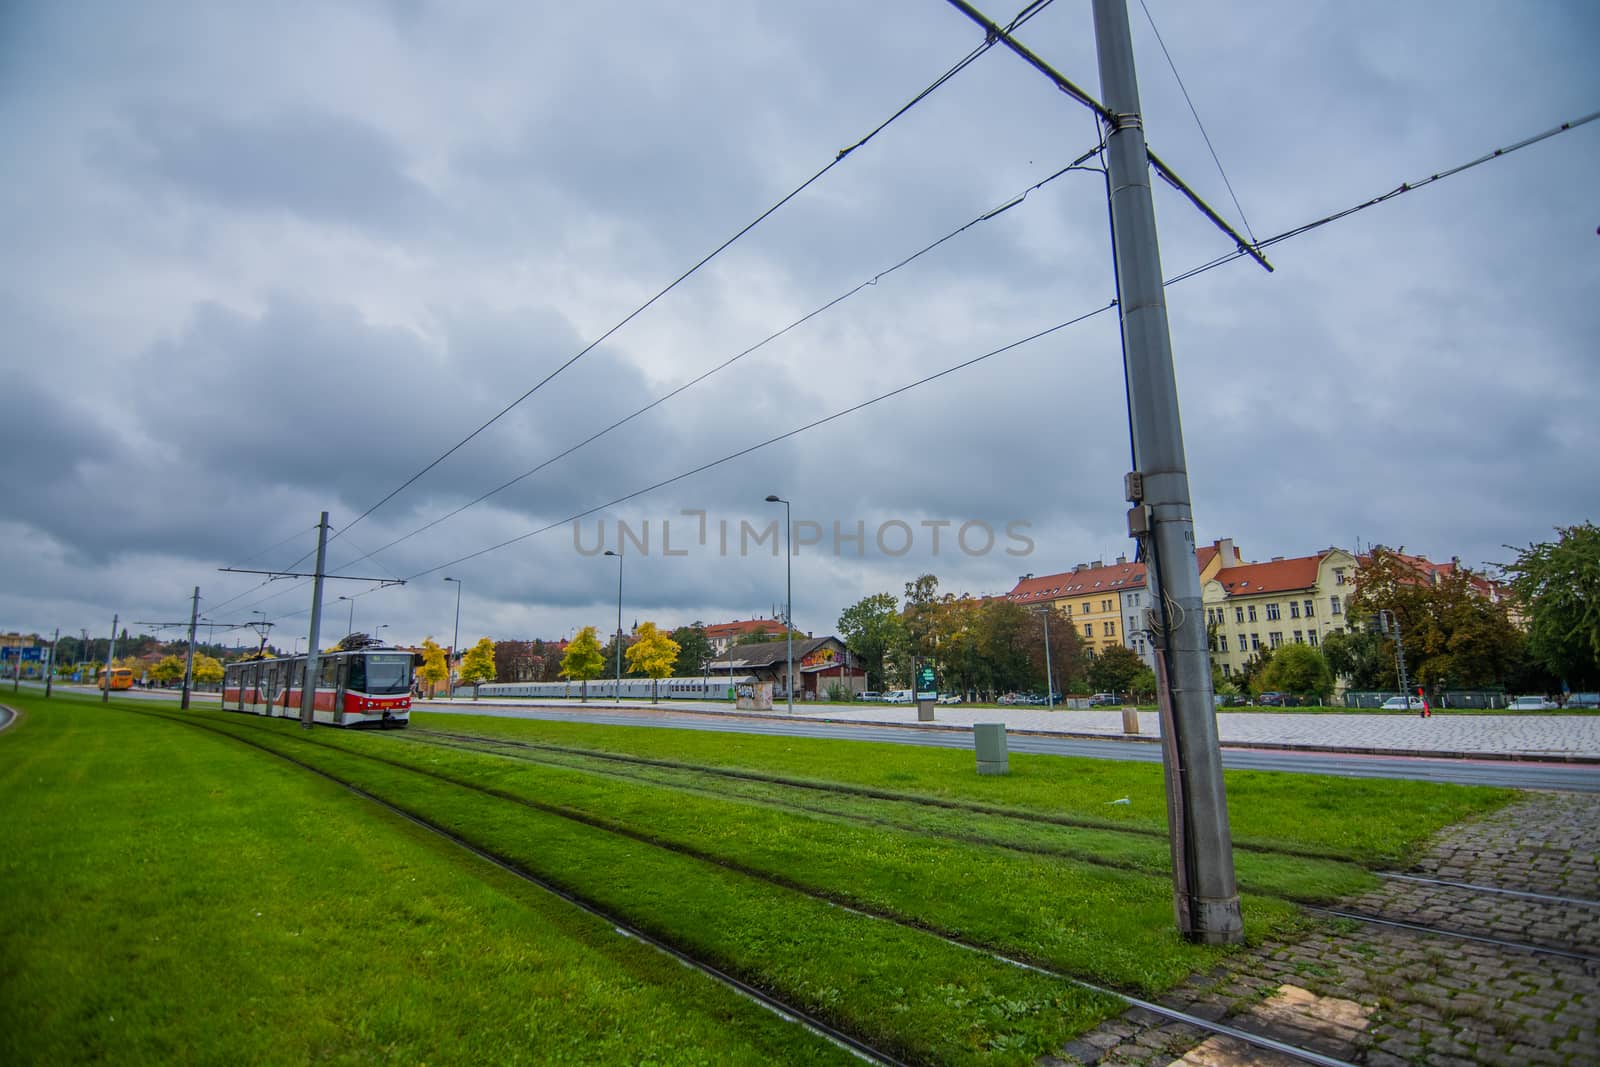 Tram driving in big avenue surrounded with big buildings in europe by gonzalobell